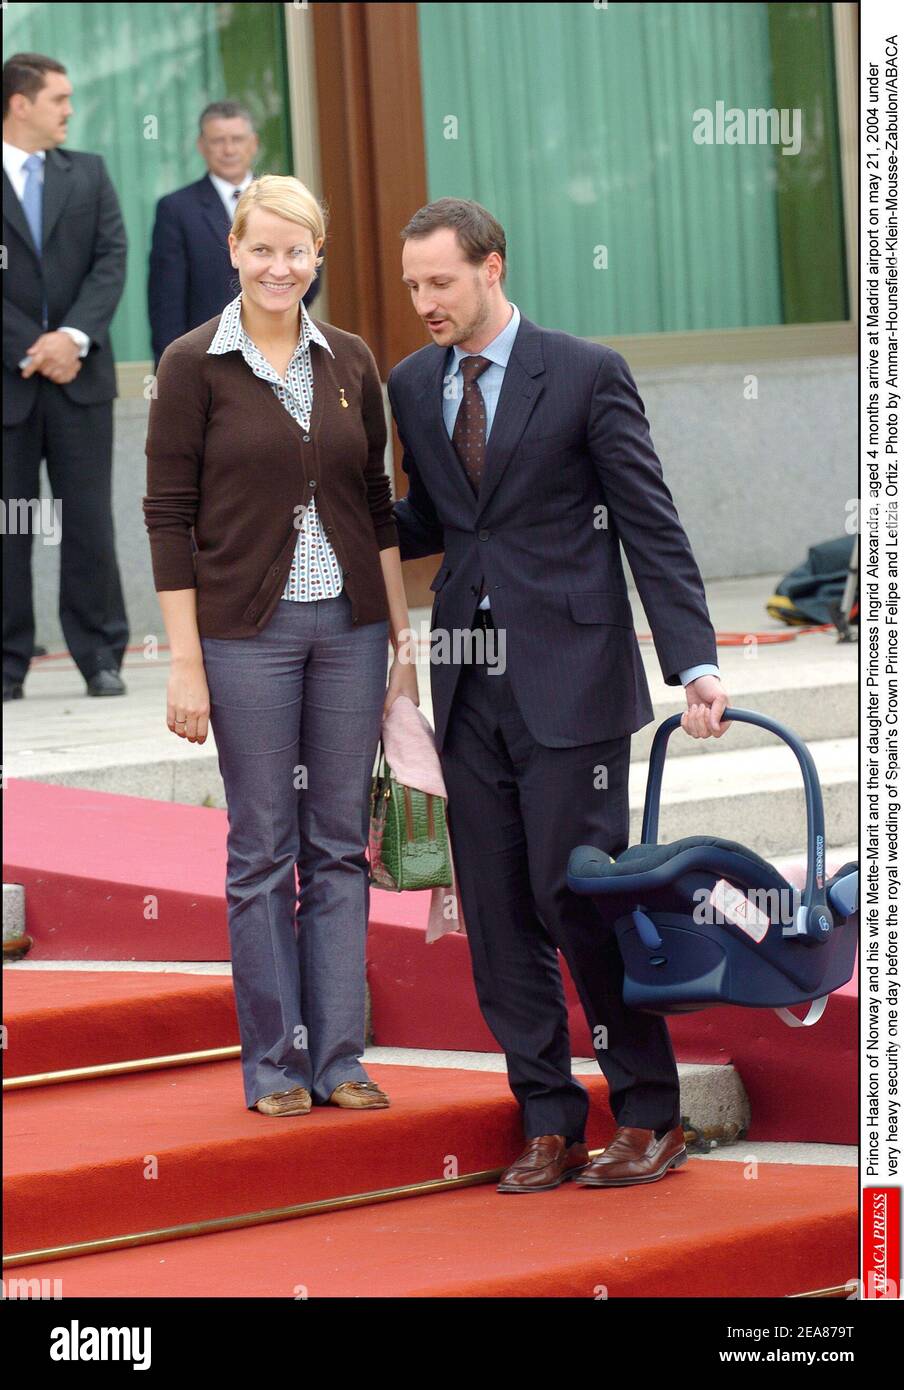 Prince Haakon of Norway and his wife Mette-Marit and their daughter Princess Ingrid Alexandra, aged 4 months arrive at Madrid airport on may 21, 2004 under very heavy security one day before the royal wedding of Spain's Crown Prince Felipe and Letizia Ortiz. Photo by Ammar-Hounsfield-Klein-Mousse-Zabulon/ABACA Stock Photo